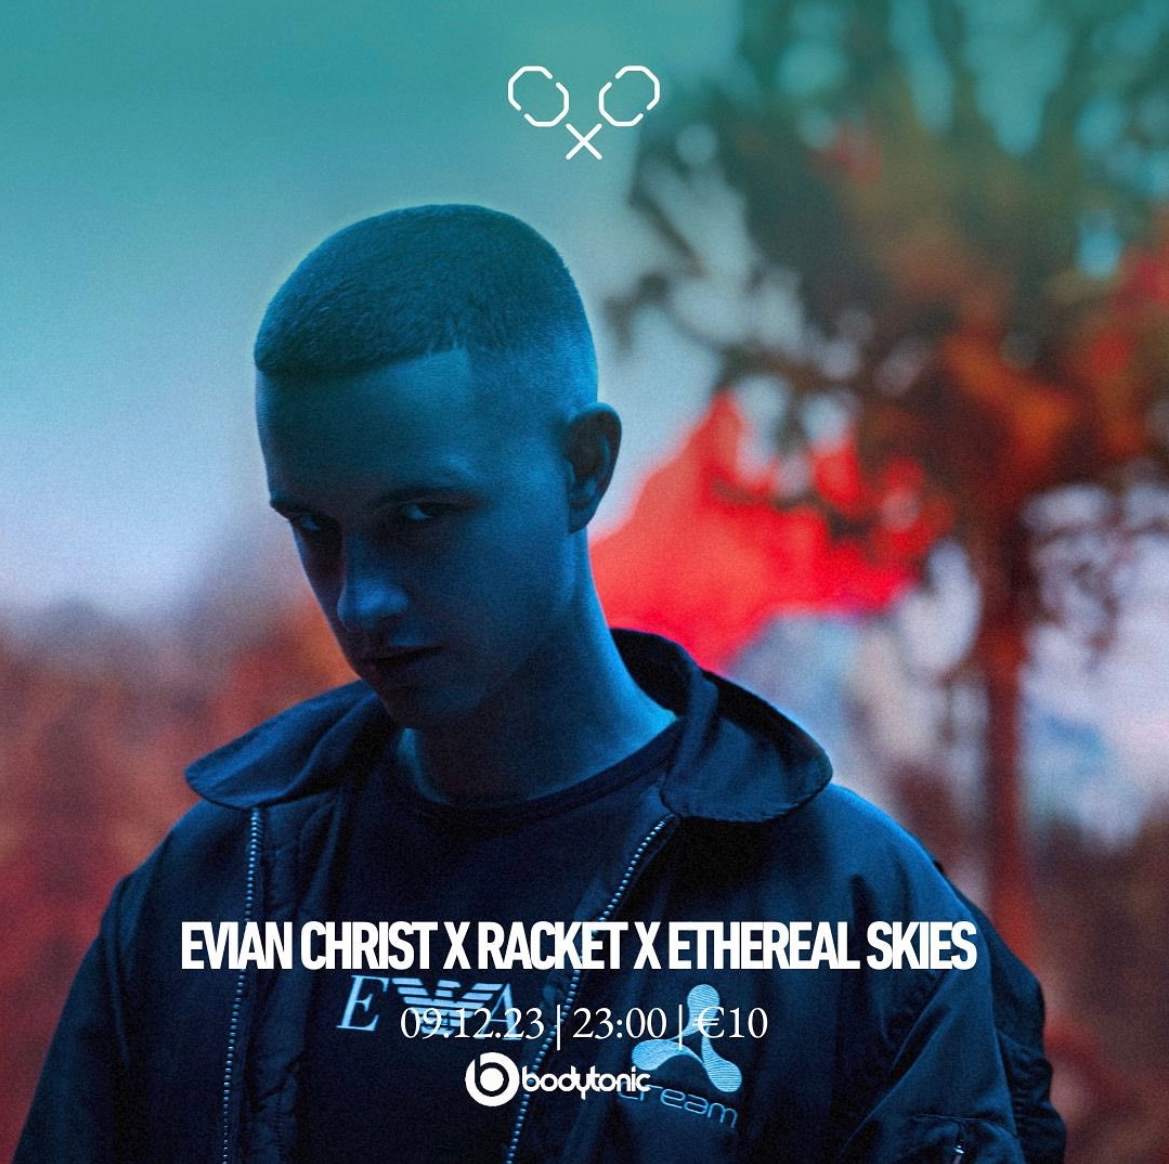 The Racket Space X Ethereal Skies presents: Evian Christ + Sonia - Página frontal